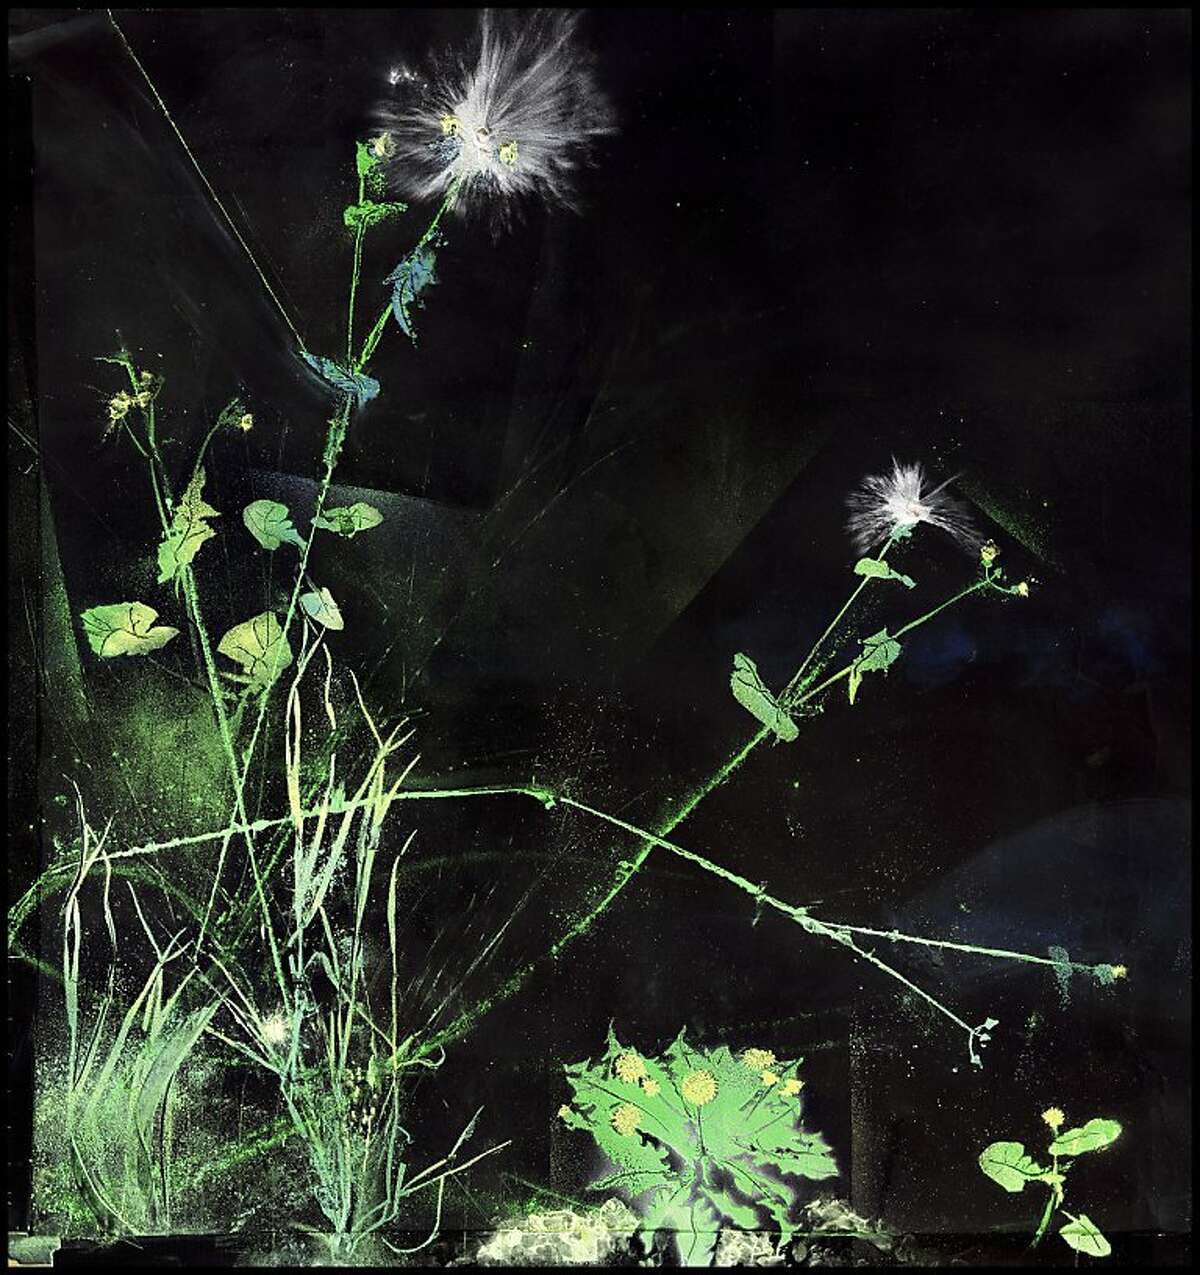 "Digitaria Sanguinalis and Taraxicum Officinale Study" is an archival light-jet print by Kelly Barrie, whose work is on view at Gallery Wendi Norris. (Detail of the original work.)